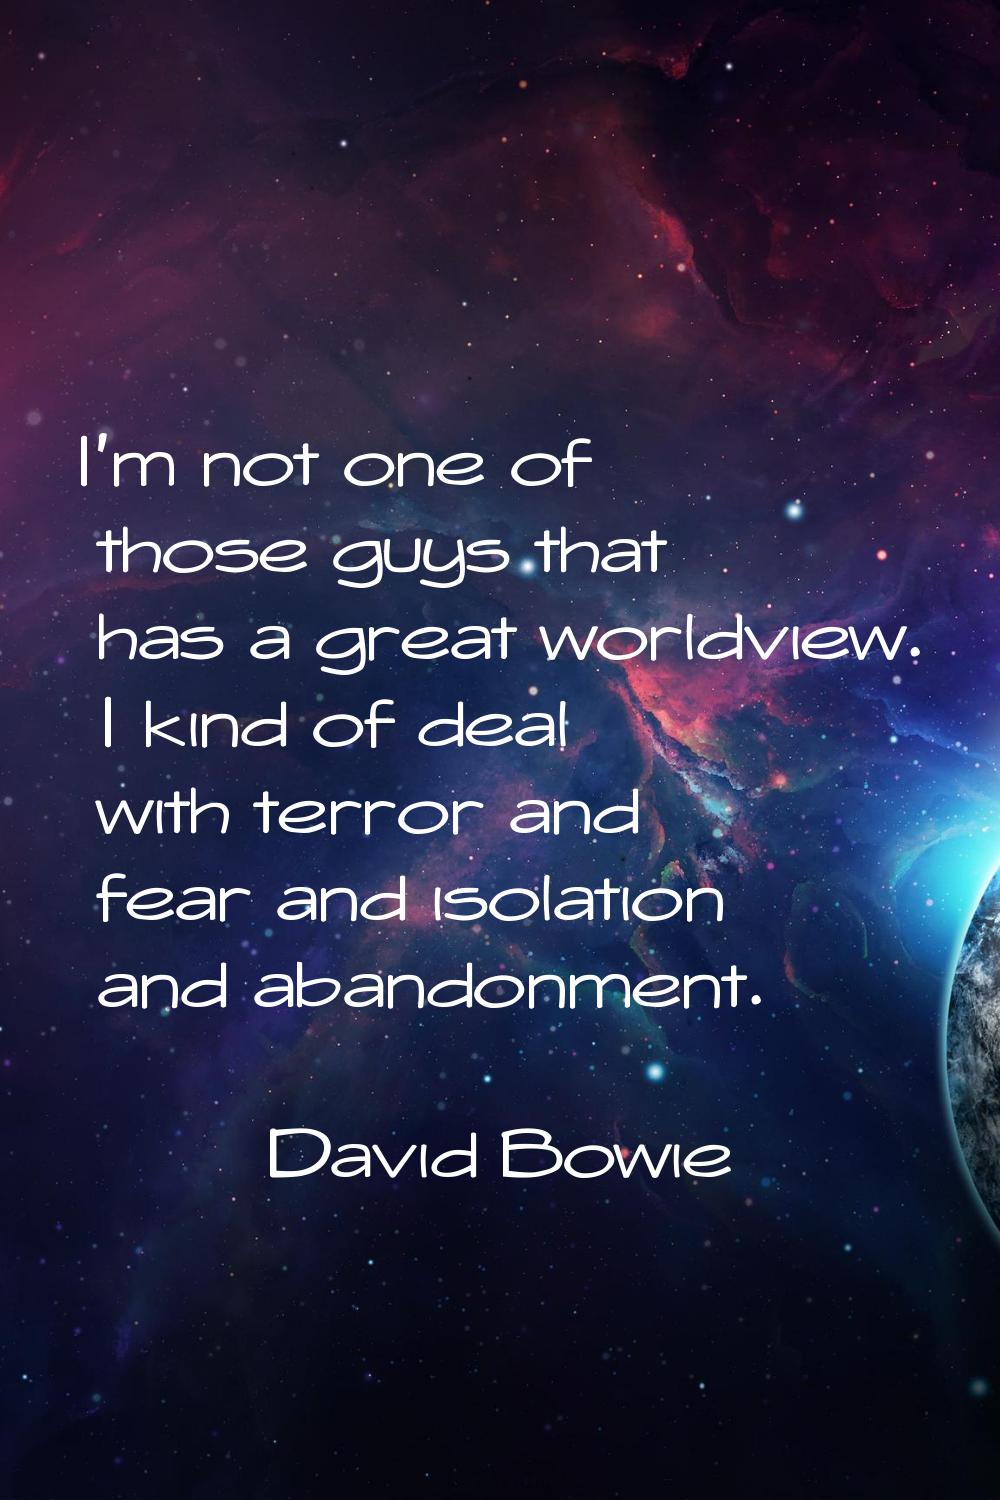 I'm not one of those guys that has a great worldview. I kind of deal with terror and fear and isola